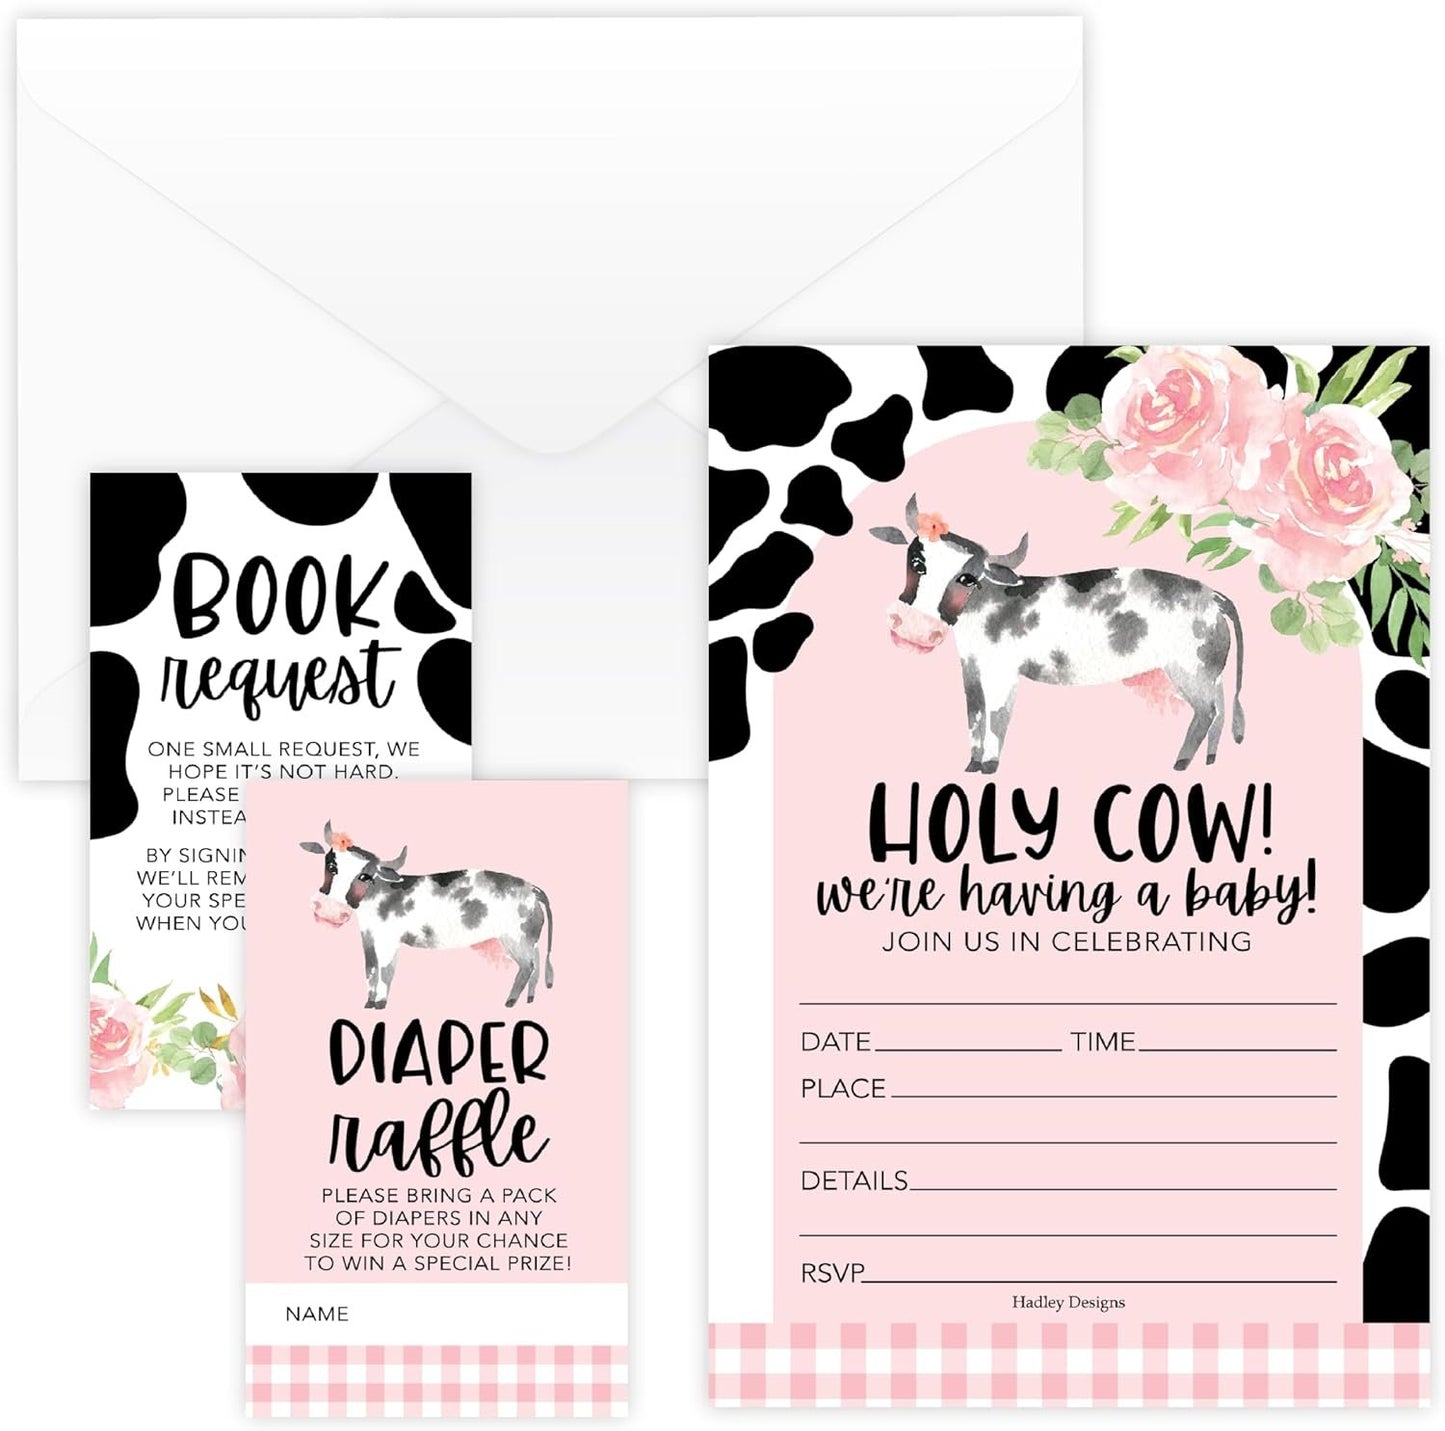 15 Holy Cow Baby Shower Invitations For Girl - Baby Girl Baby Shower Invites For Girl Baby Shower Invitations, Baby Girl Shower Invitations, Invitations For Baby Shower Girl, Baby Invitations